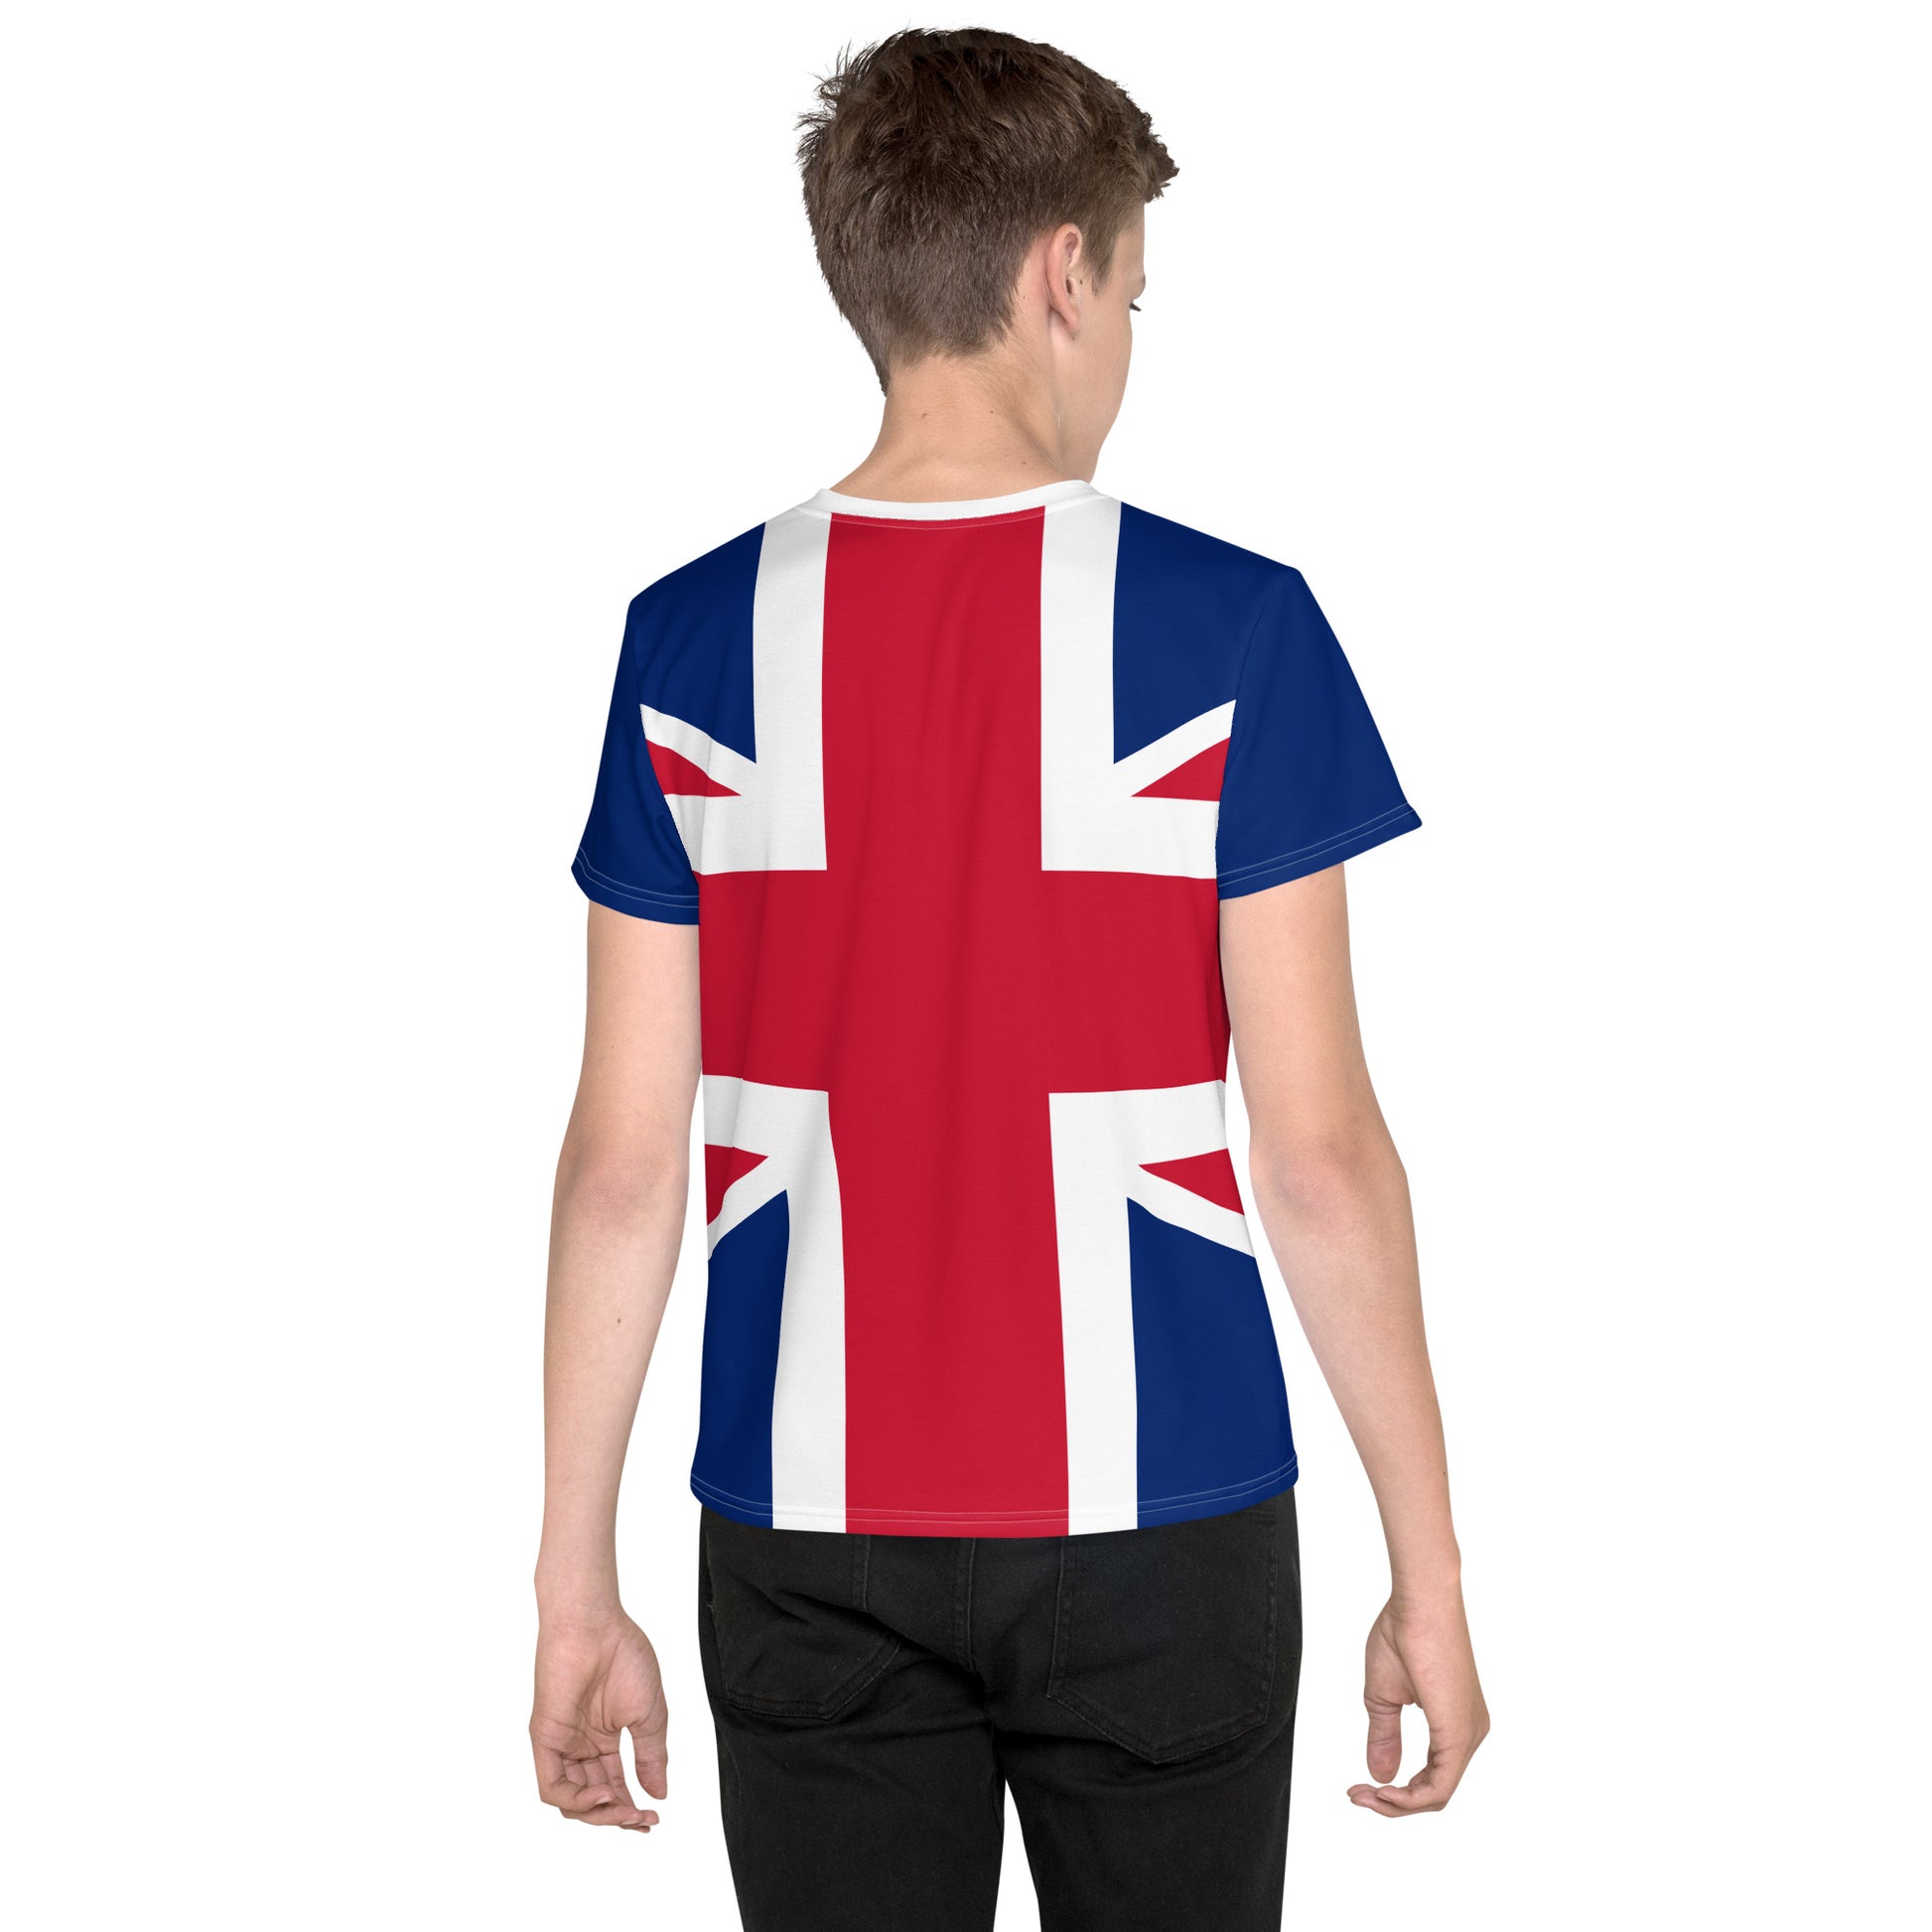 UK Shirt For Young Ones